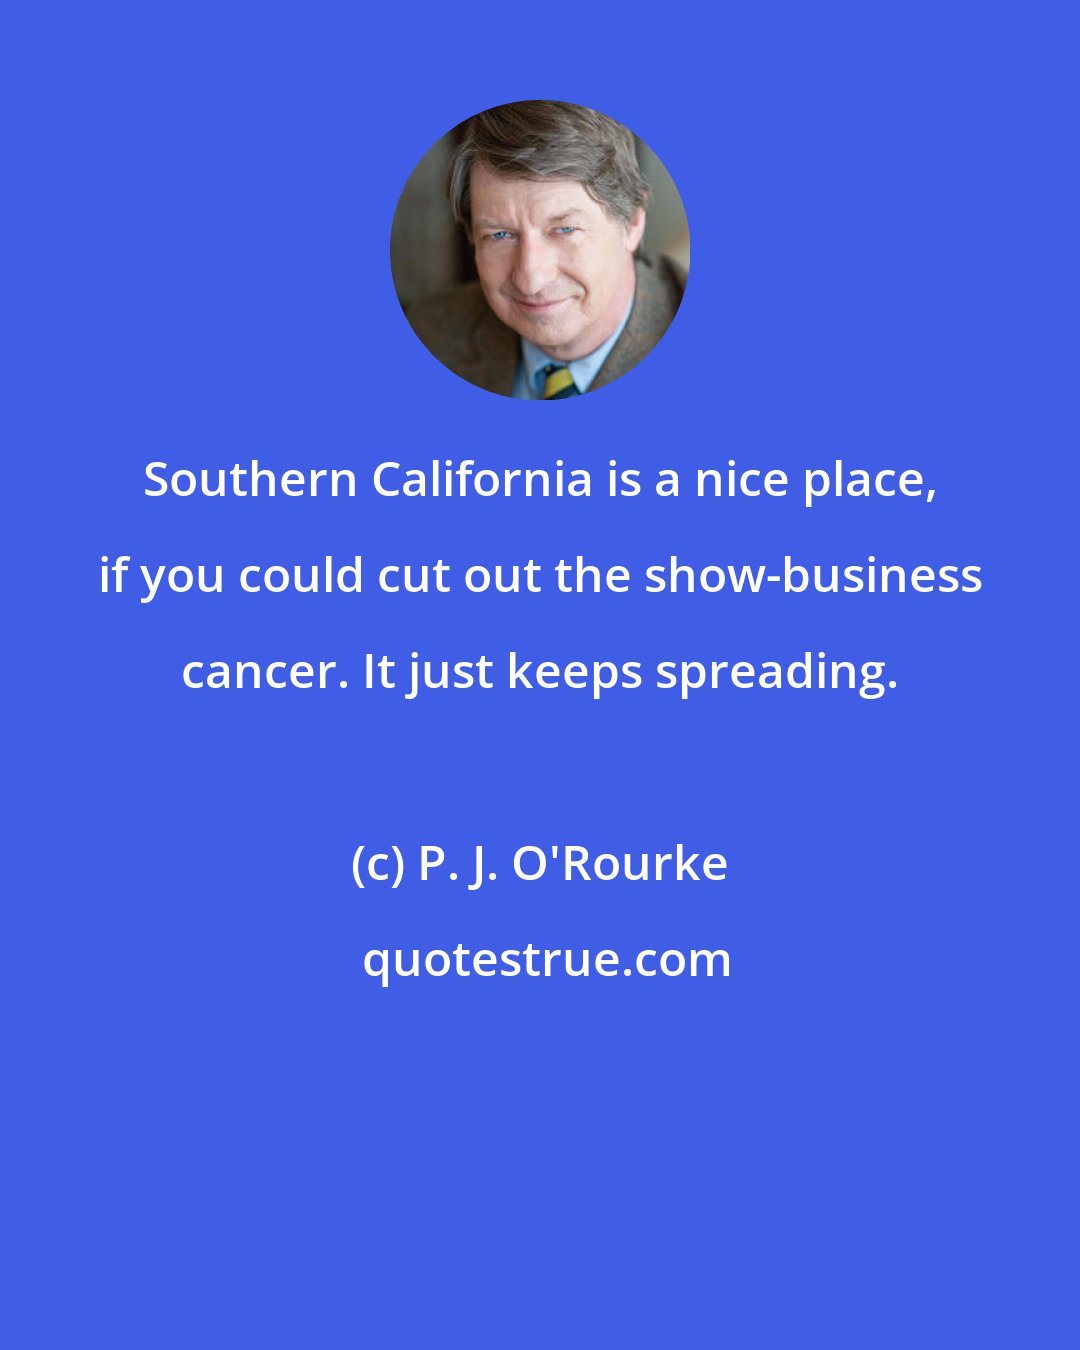 P. J. O'Rourke: Southern California is a nice place, if you could cut out the show-business cancer. It just keeps spreading.